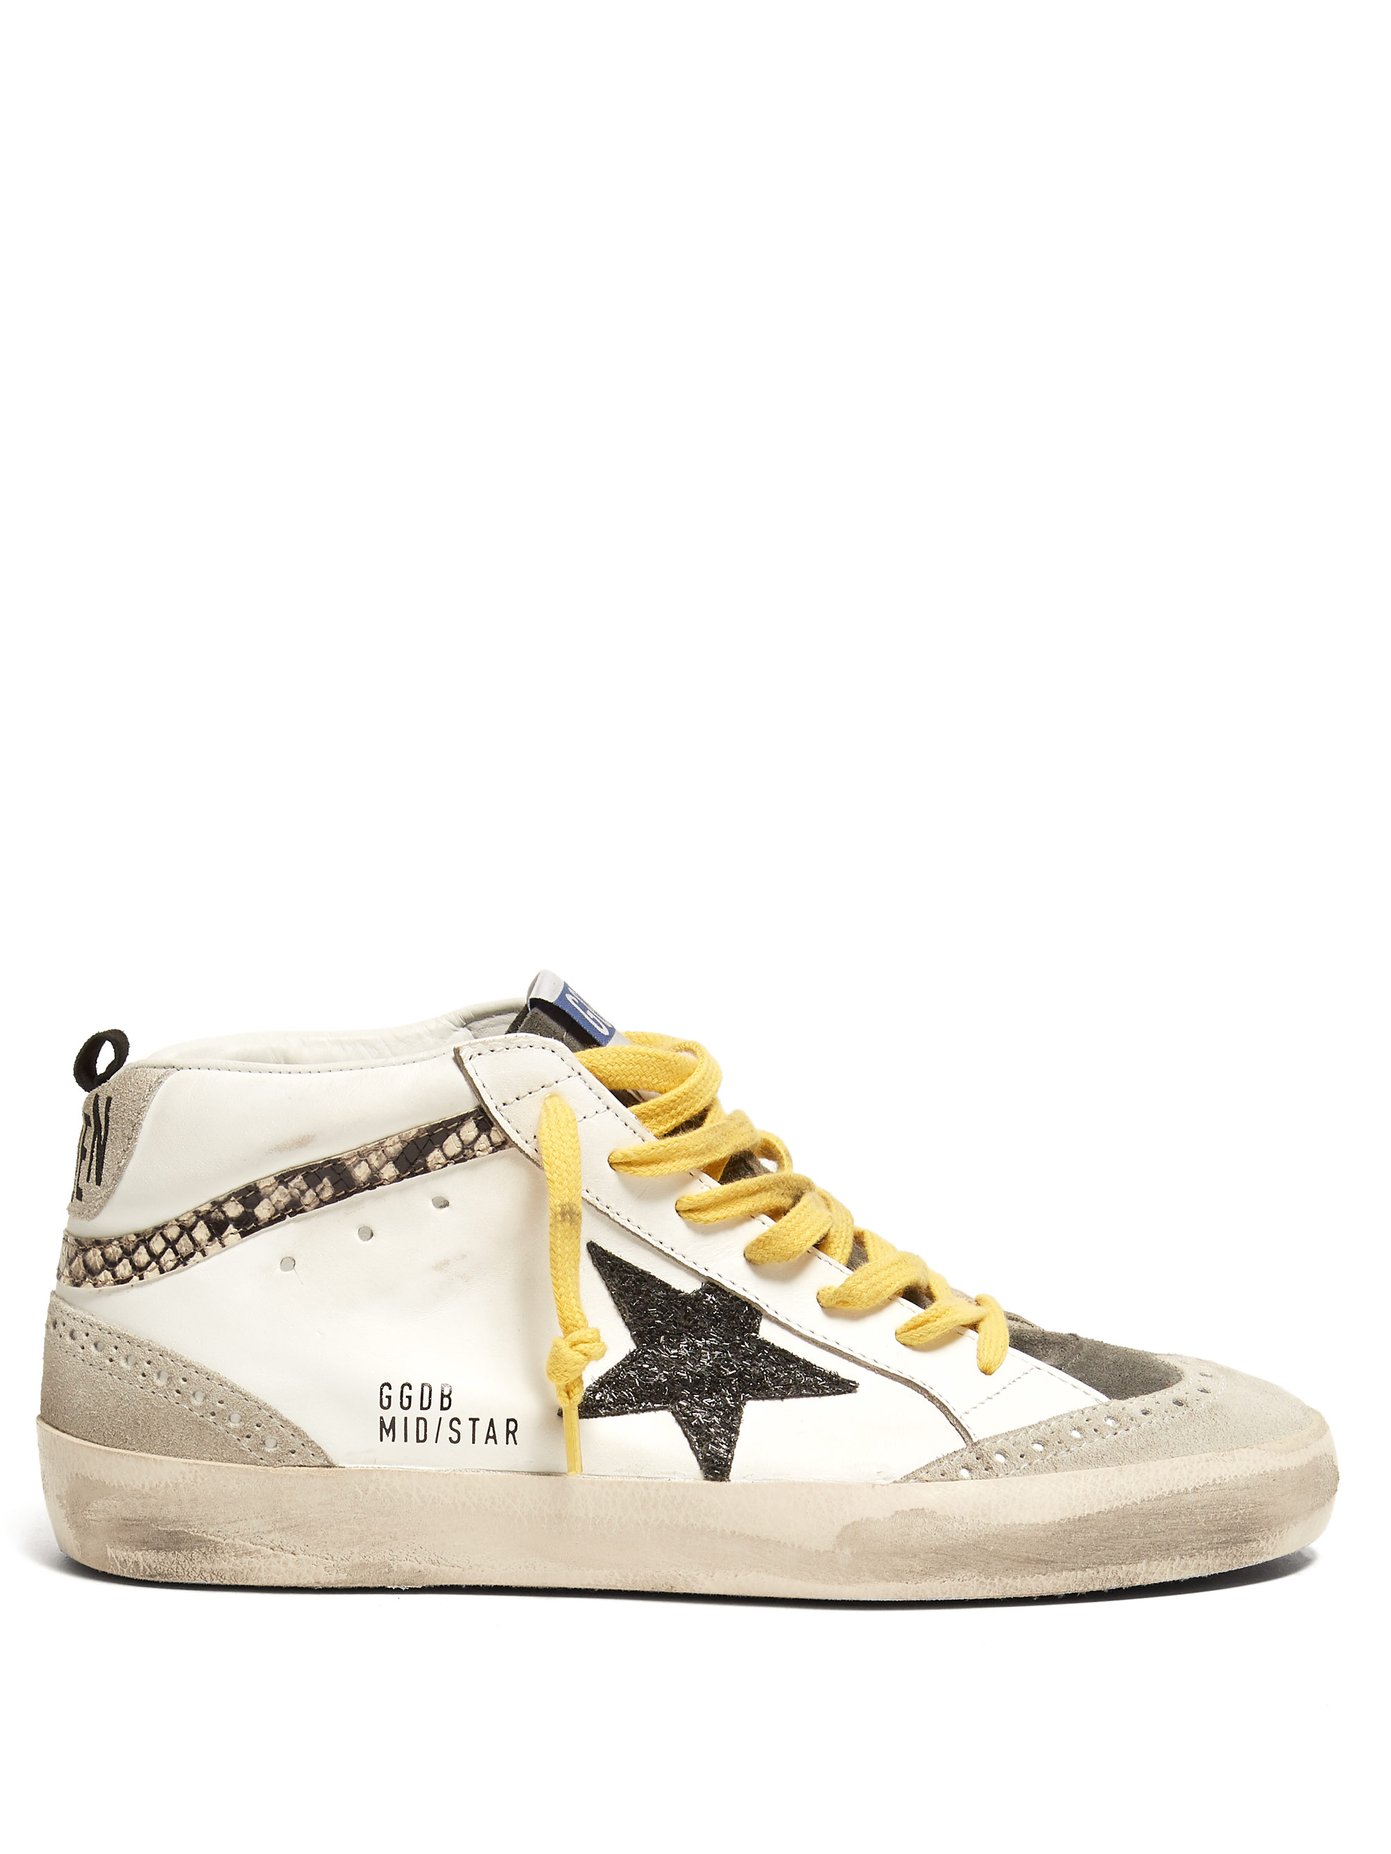 golden goose yellow laces Online 